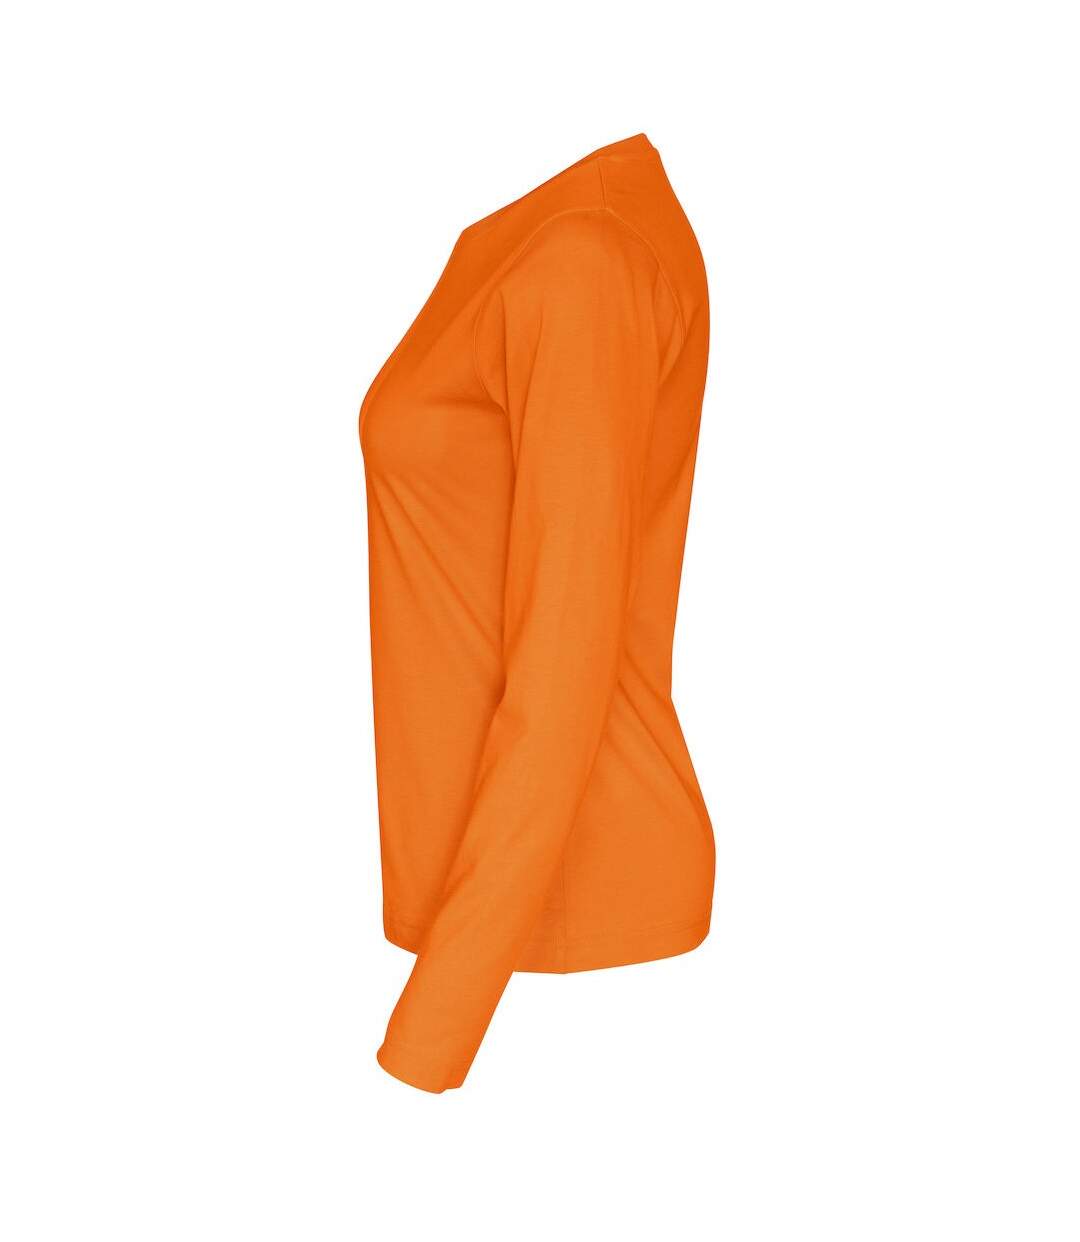 Cottover Womens/Ladies Long-Sleeved T-Shirt (Orange)